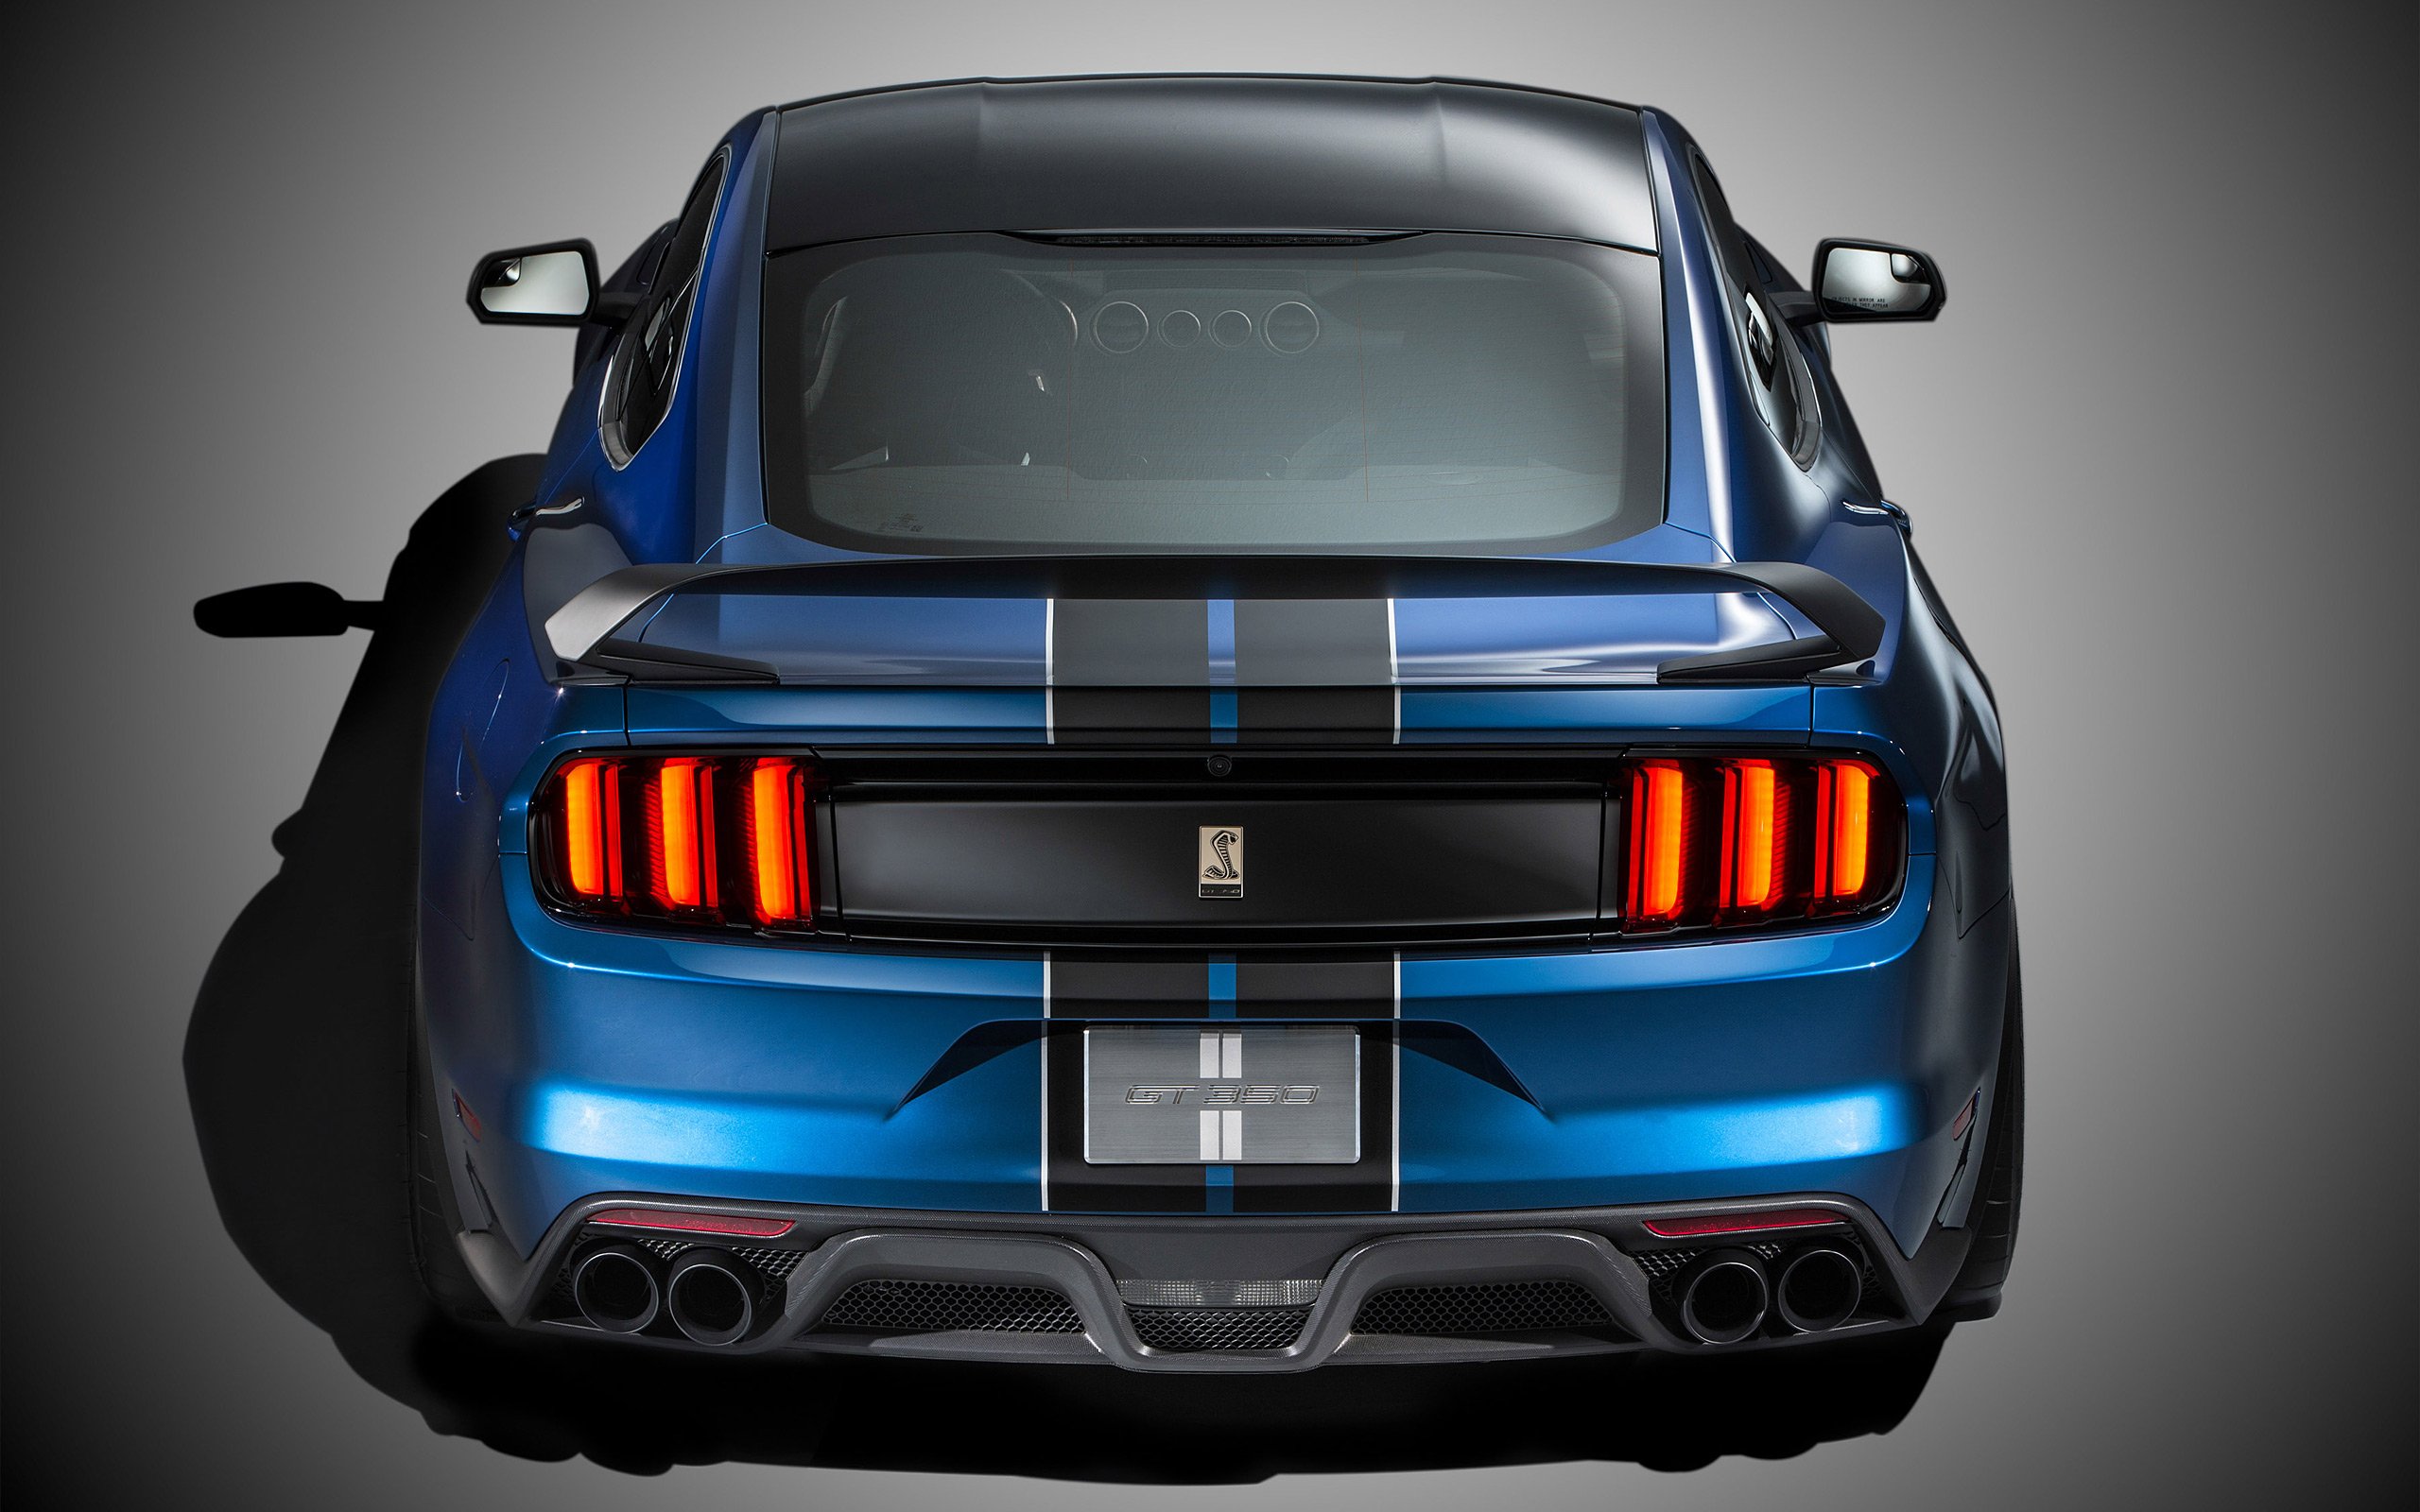 Free download Ford Mustang Shelby GT350R 2015 Dark Cars Wallpaper [2560x1600] for your Desktop, Mobile & Tablet. Explore Mustang GT350R Wallpaper. Shelby Mustang Wallpaper, Ford GT 2017 Wallpaper, 2016 Shelby GT350 Wallpaper